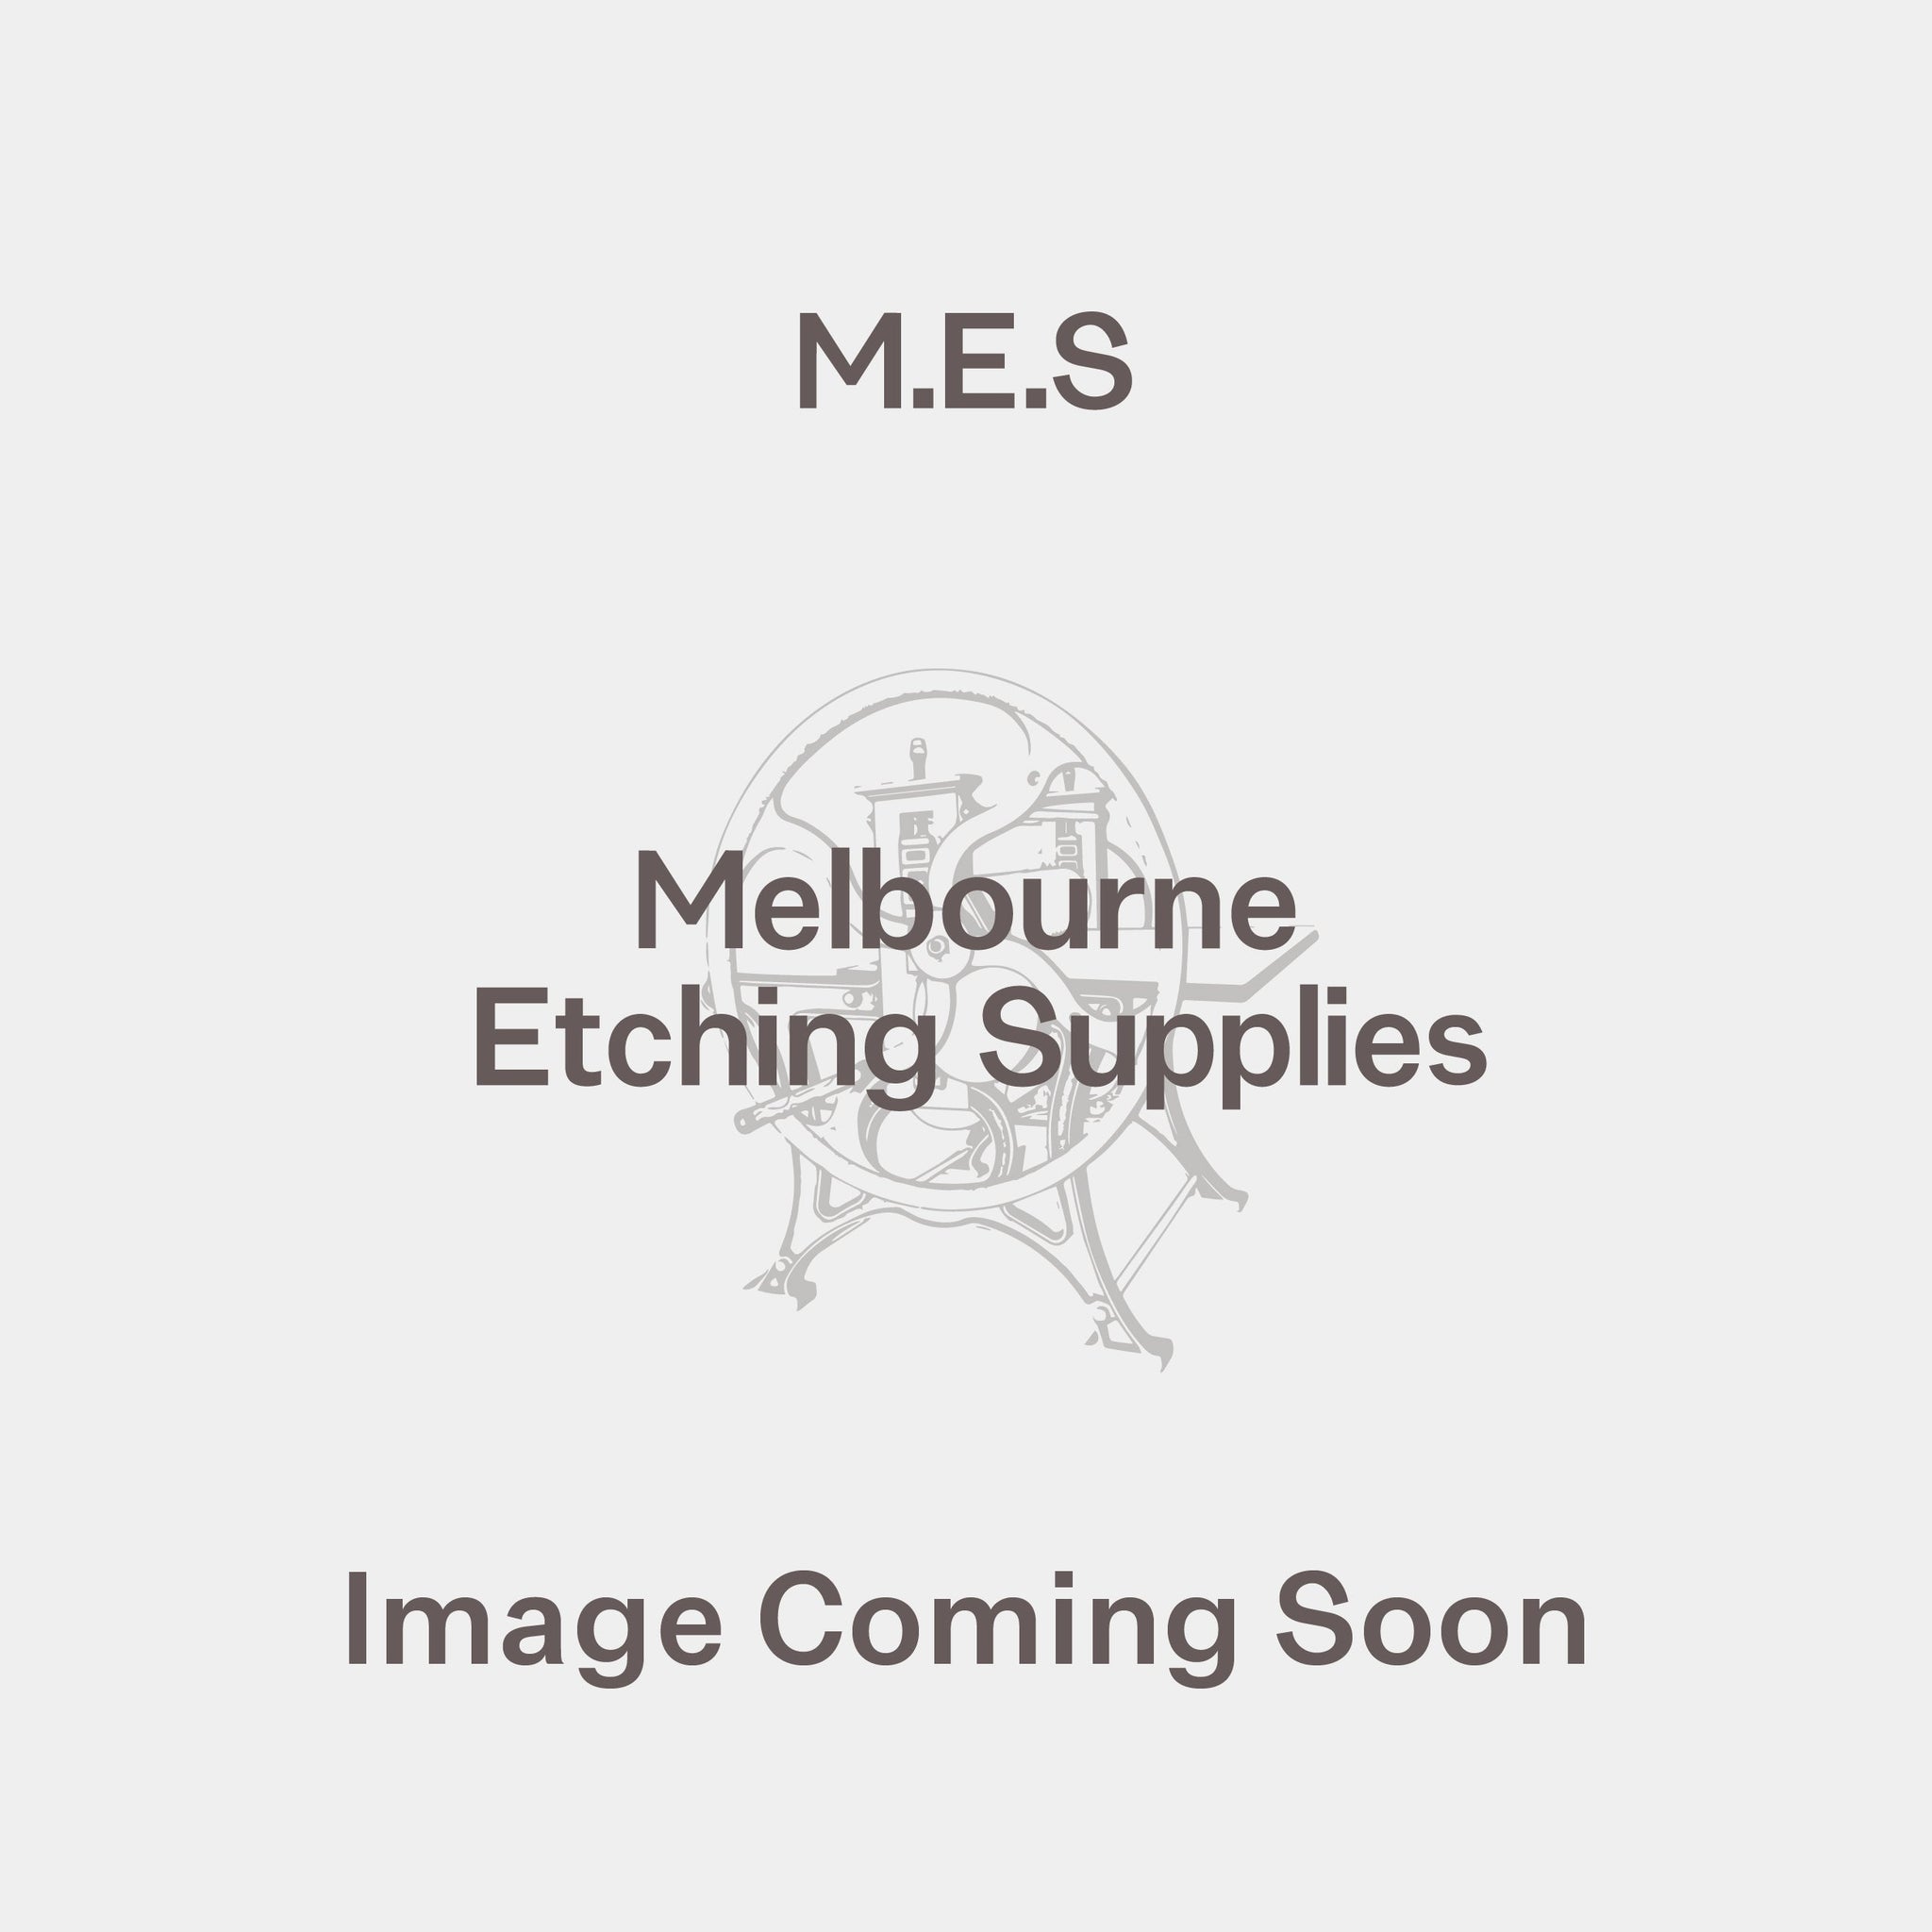 Surrey Drawing 150gsm 59x84cm - Melbourne Etching Supplies